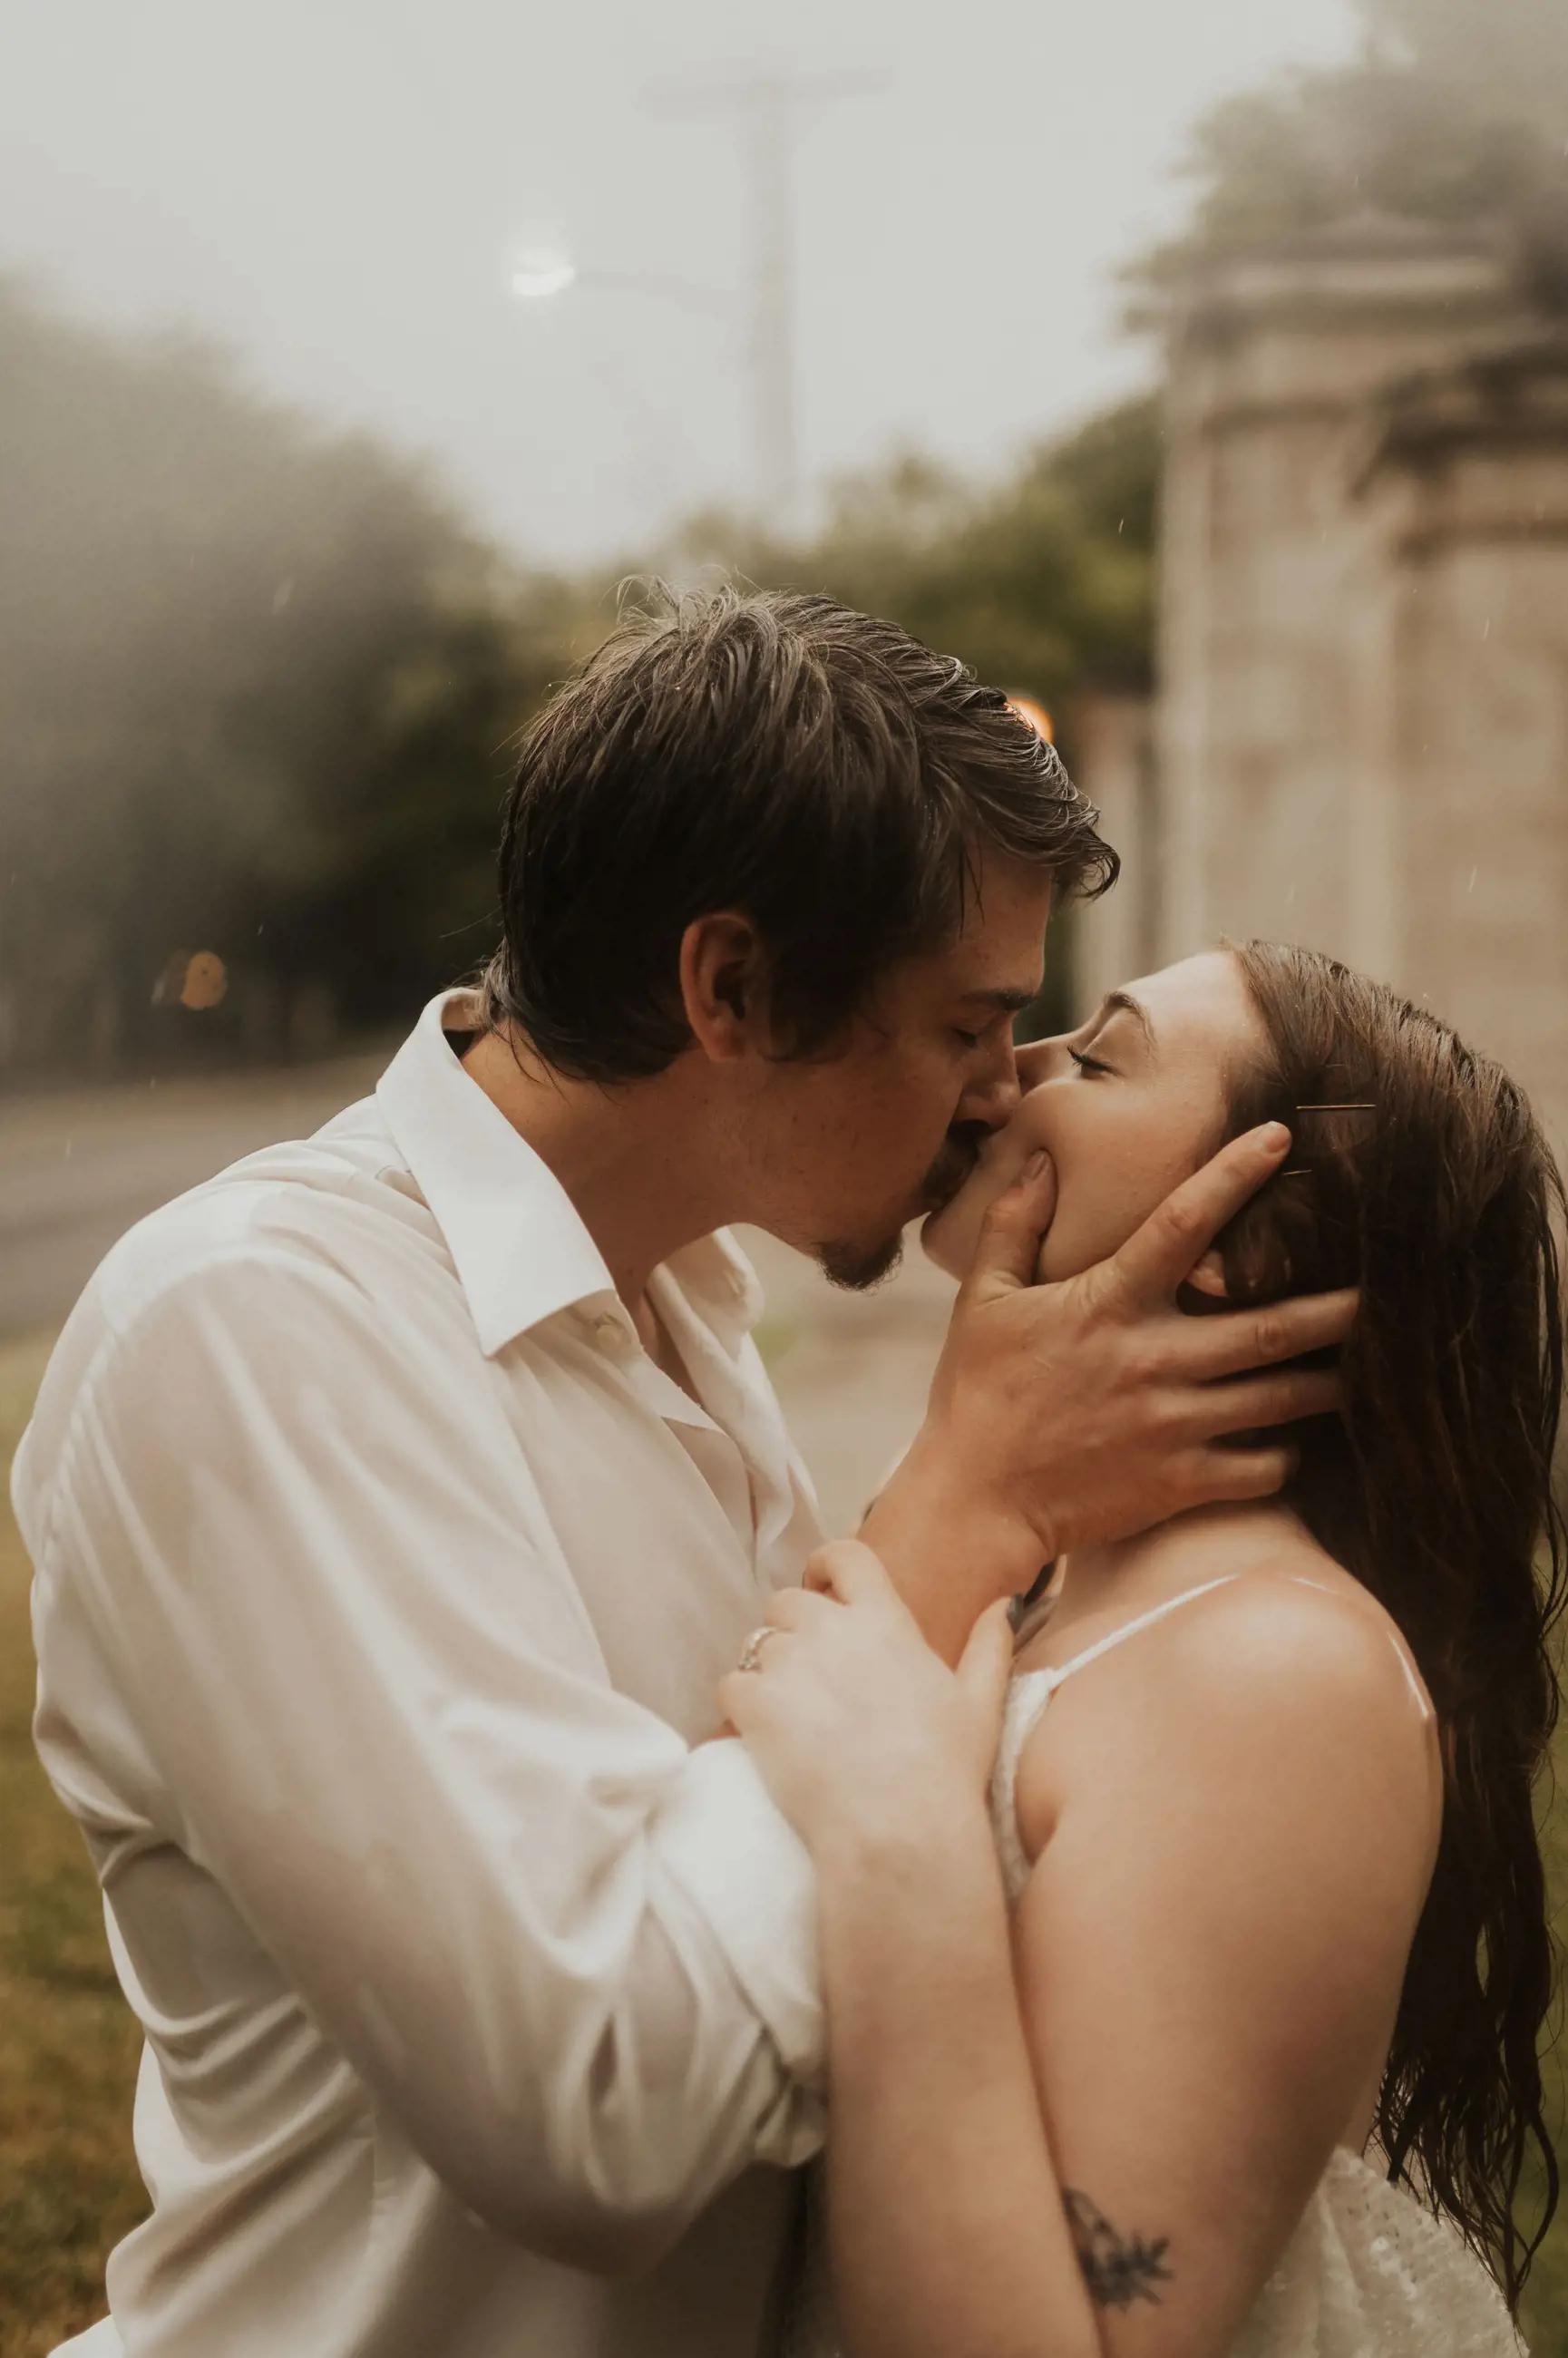 Playful + Romantic Rainy Day Styled Shoot ft. The Notebook Vibes Image